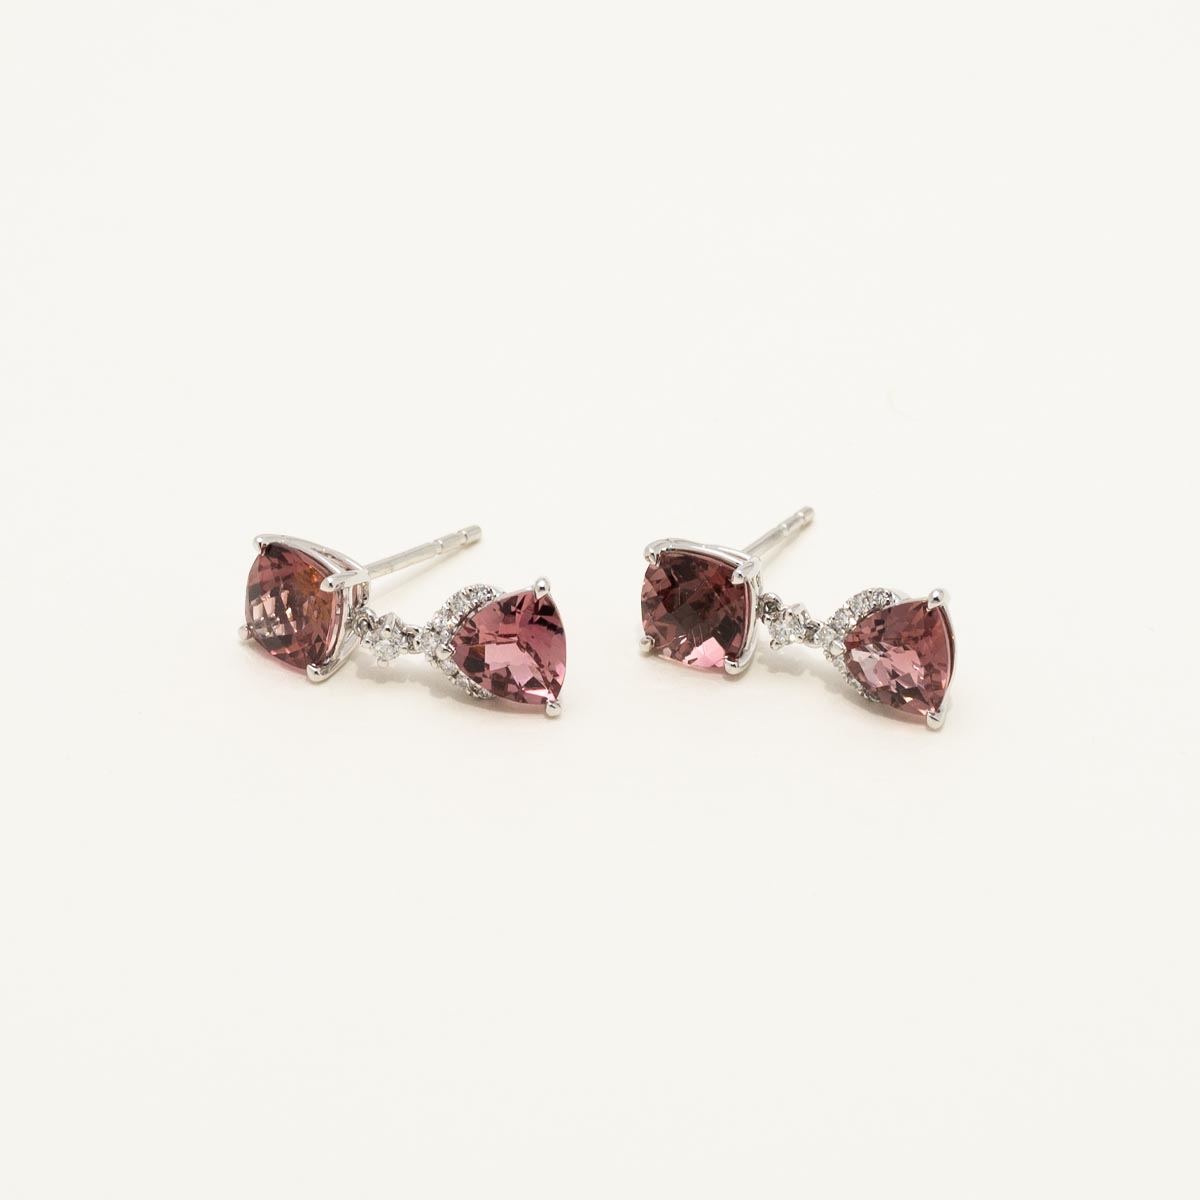 Maine Pink Tourmaline Drop Earrings in 14kt White Gold with Diamonds (1/7ct tw)